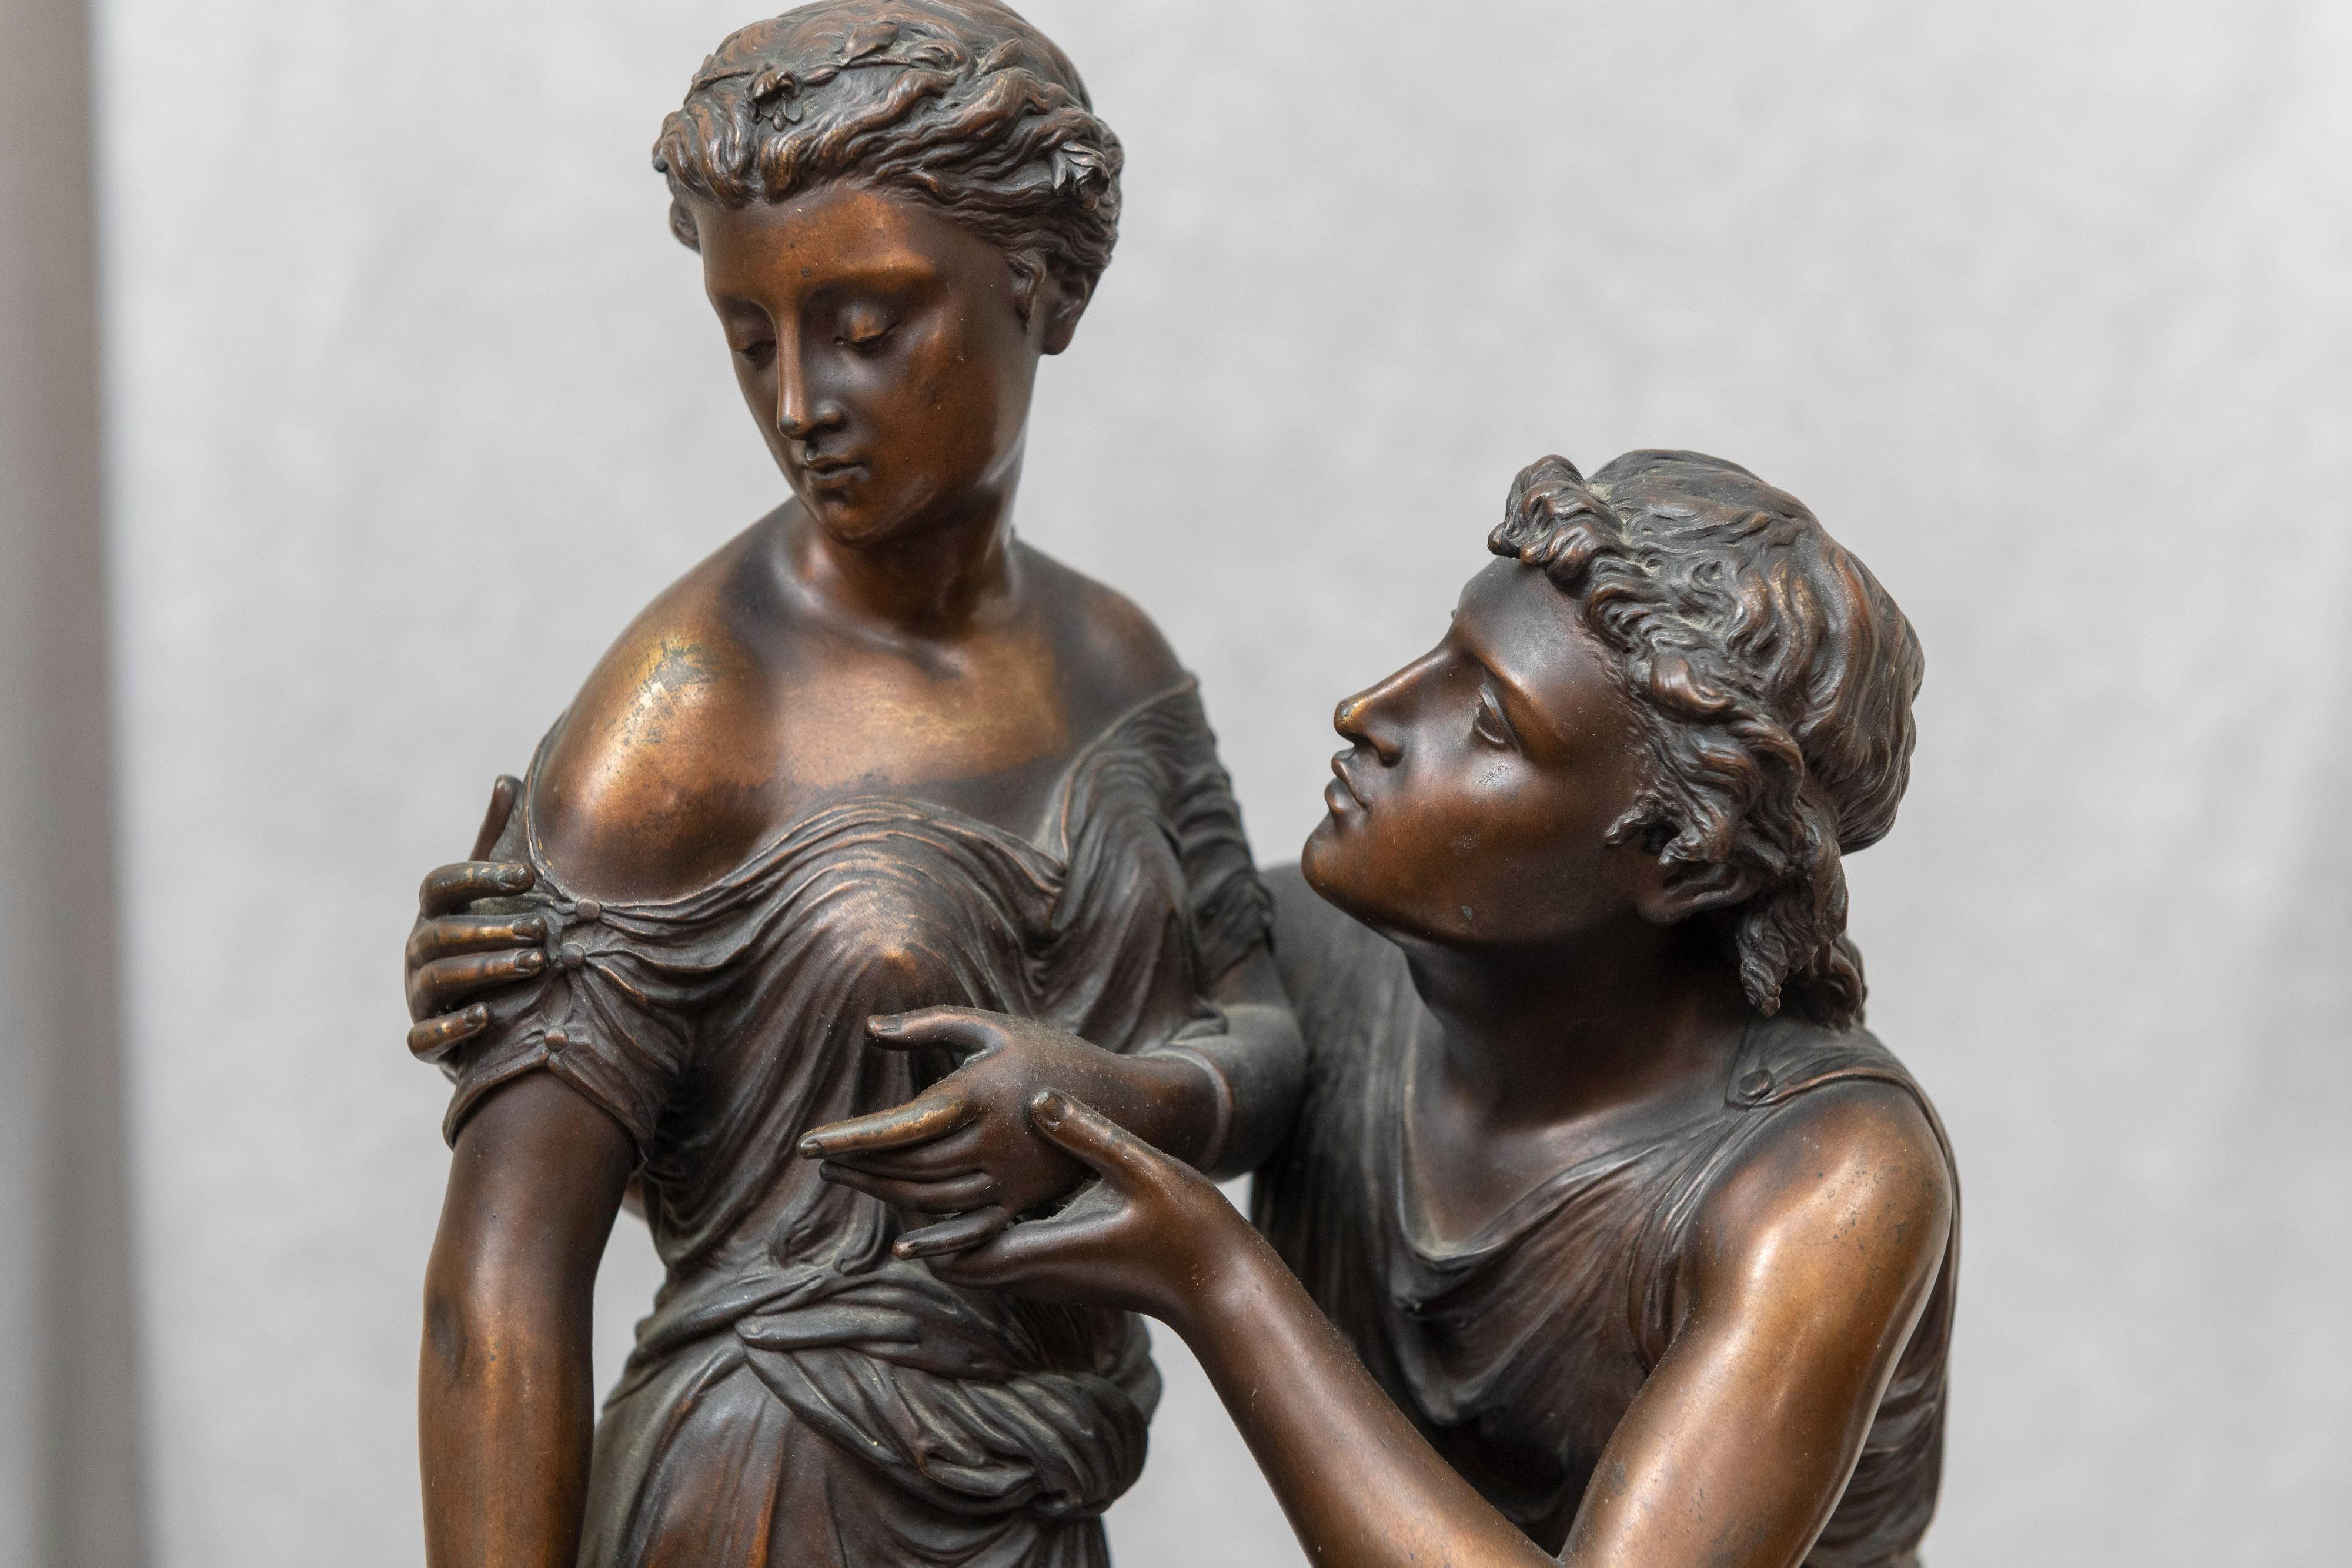 This wonderful allegorical tale is being told in bronze by the noted French sculptor Jean-Louis Gregoire, 1840-1890. The man kneeling down is apparently not making much headway in convincing the shy maiden that he is the choice for her affections.